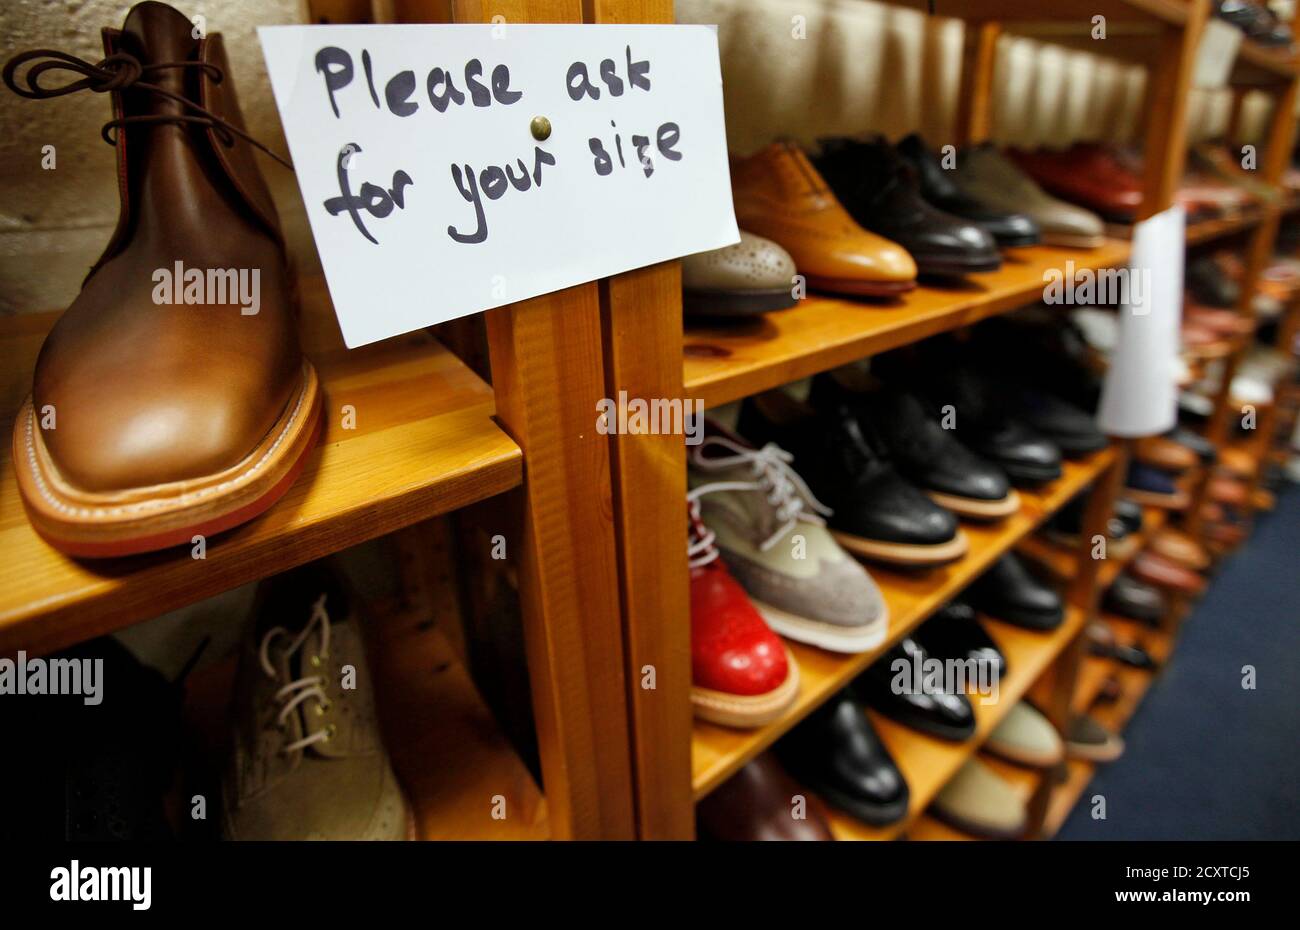 Shoes are displayed at the Tricker's shoe factory in Northampton, central  England, April 25, 2012. The small wooden door of Tricker's shoe factory  unexpectedly leads to a smartly polished showroom, its dark